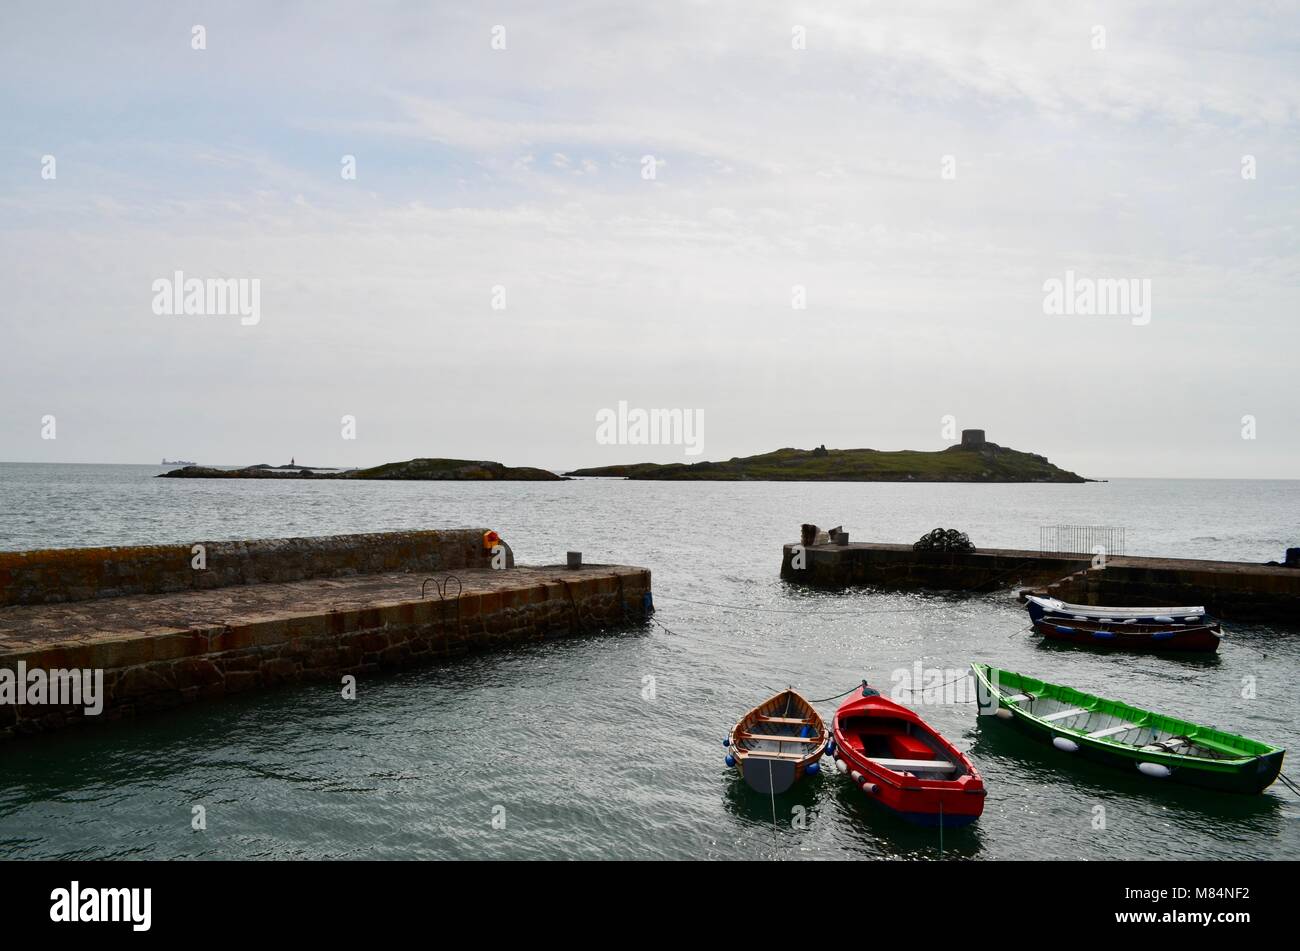 Red Boat, Green Boat and White Boat waiting at Dalkey Harbour, Dublin Stock Photo